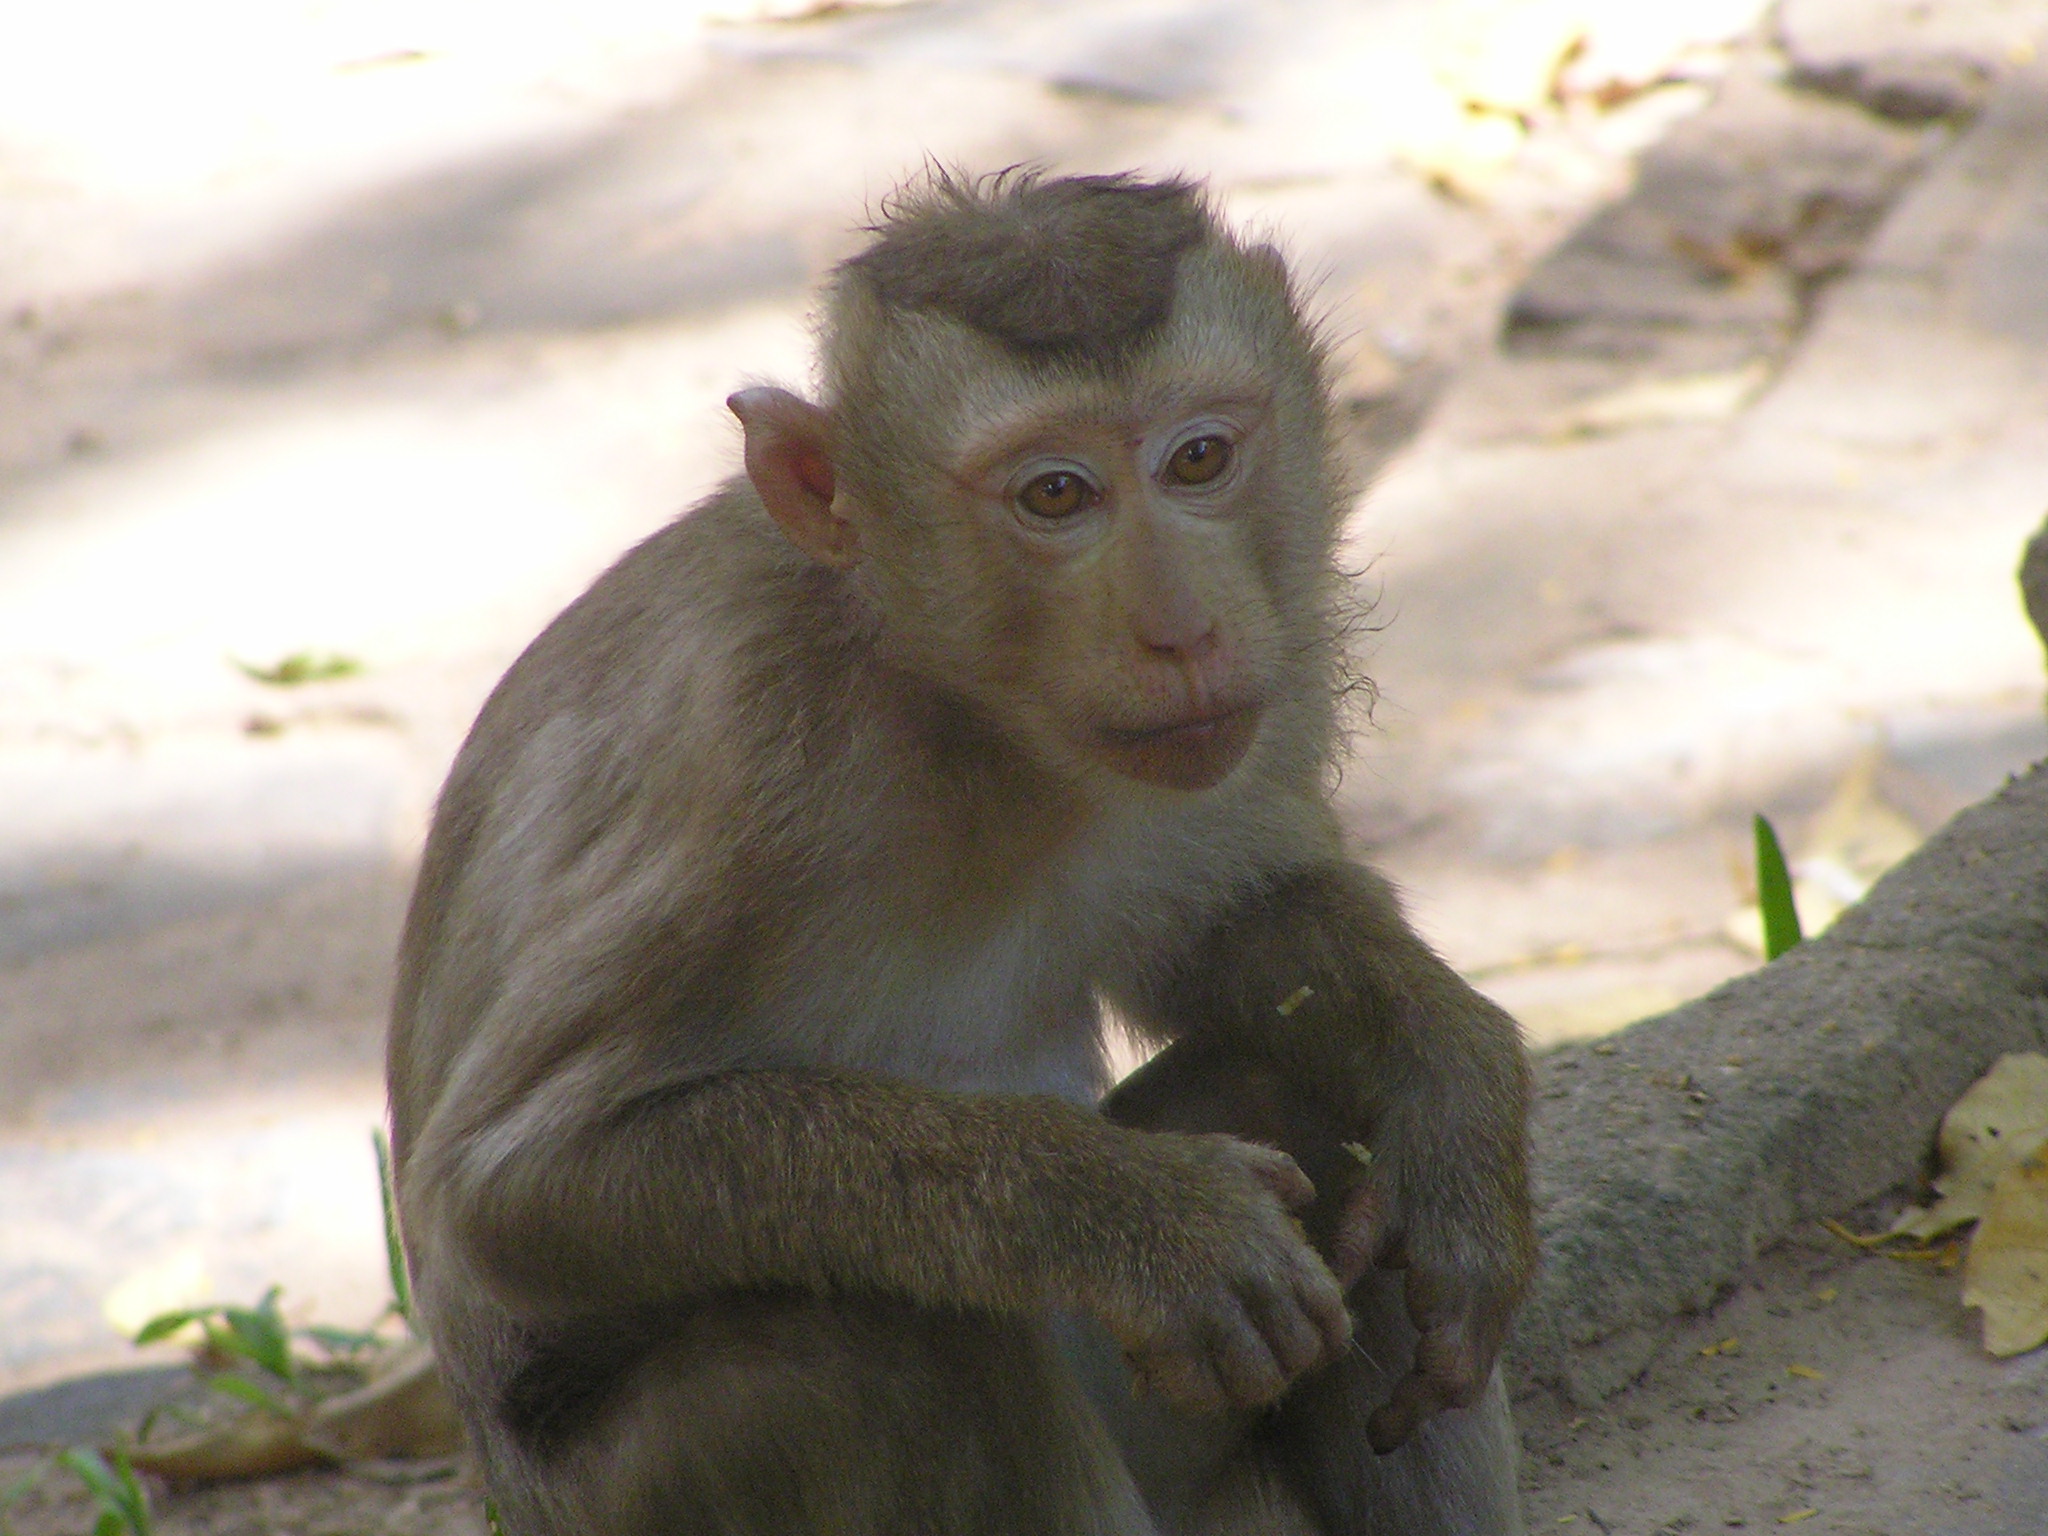 a close up of a monkey on a cement ground